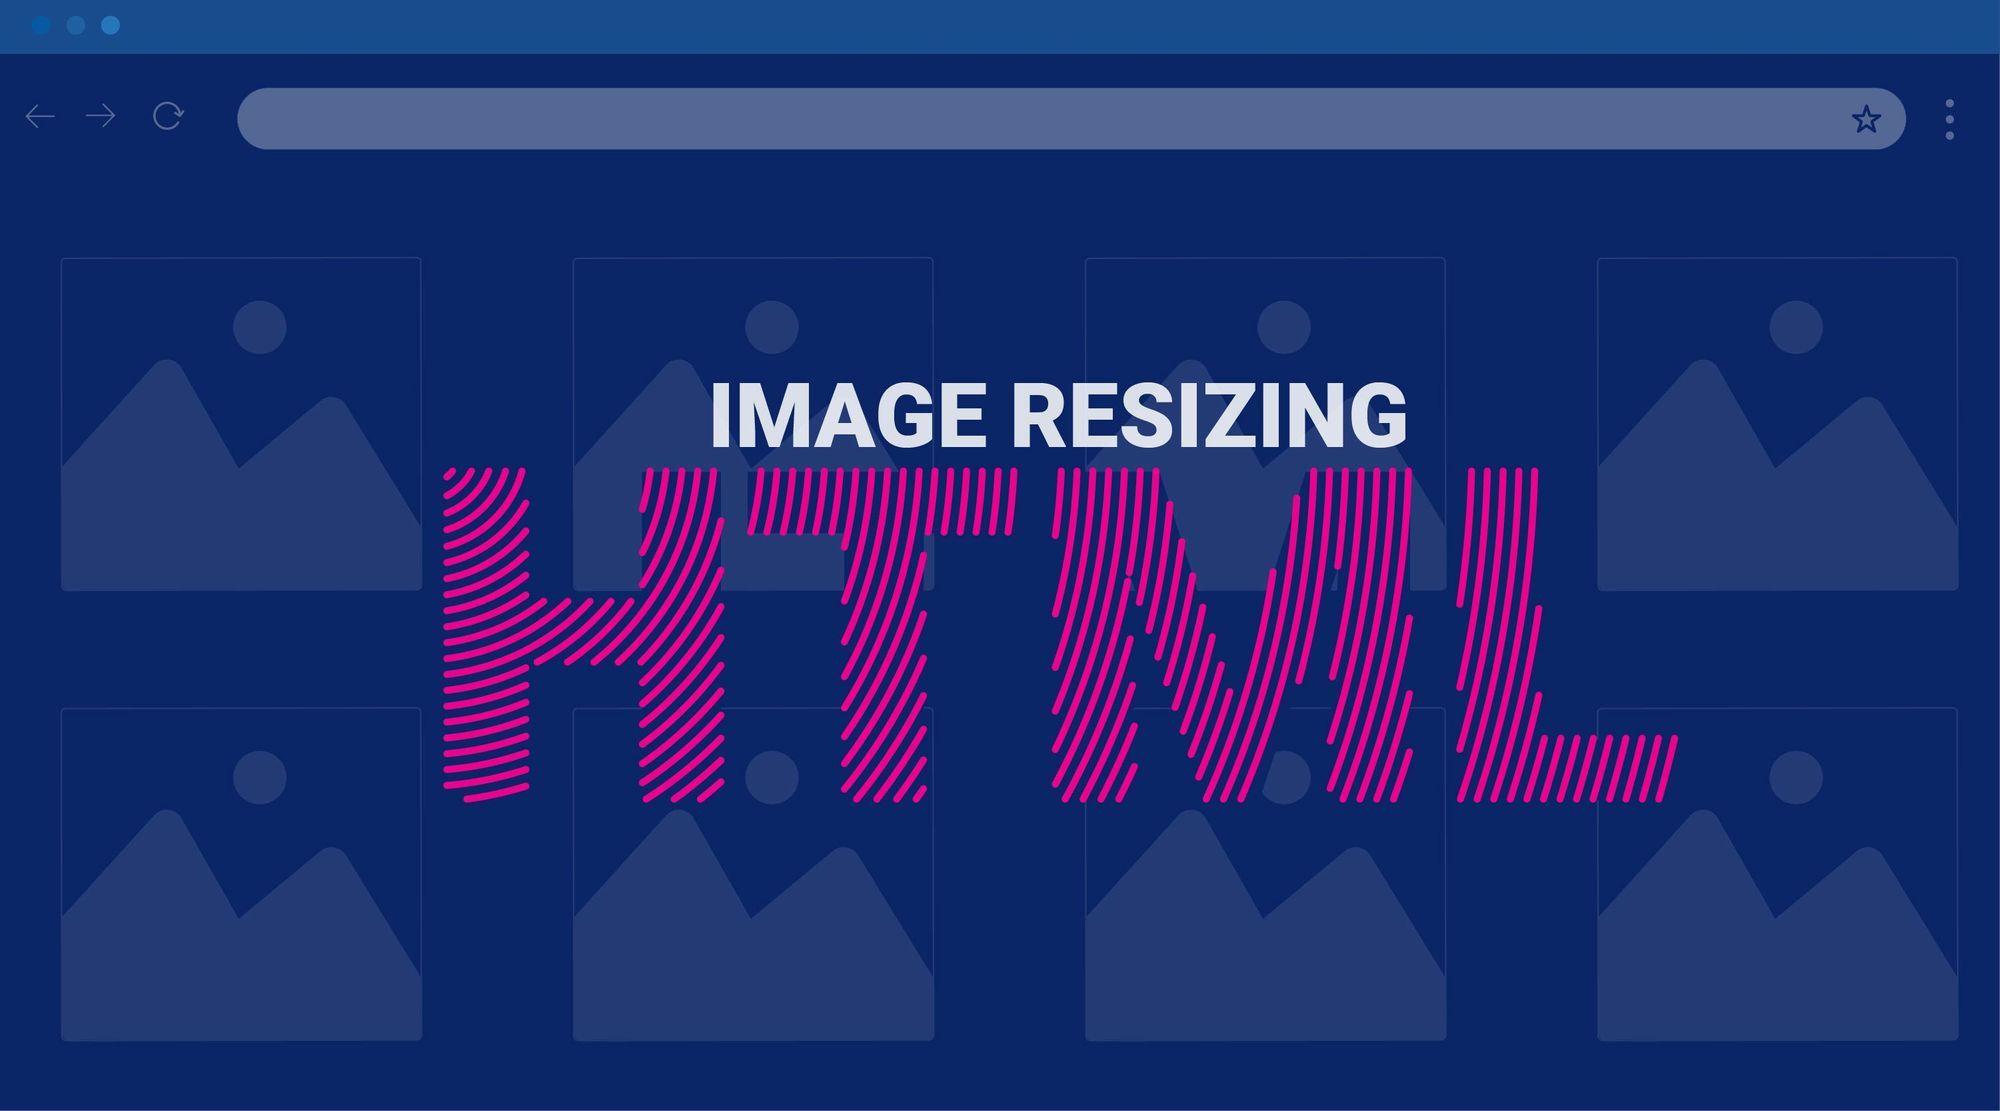 resize image in html